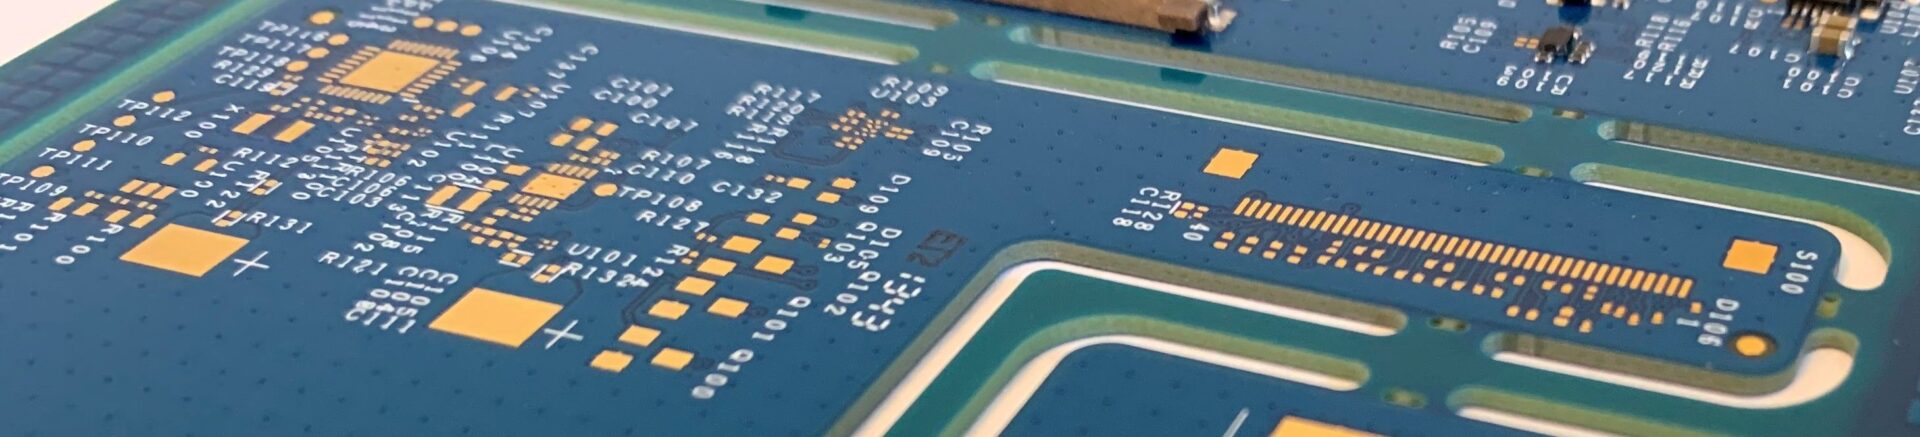 A close up of the printed circuit board